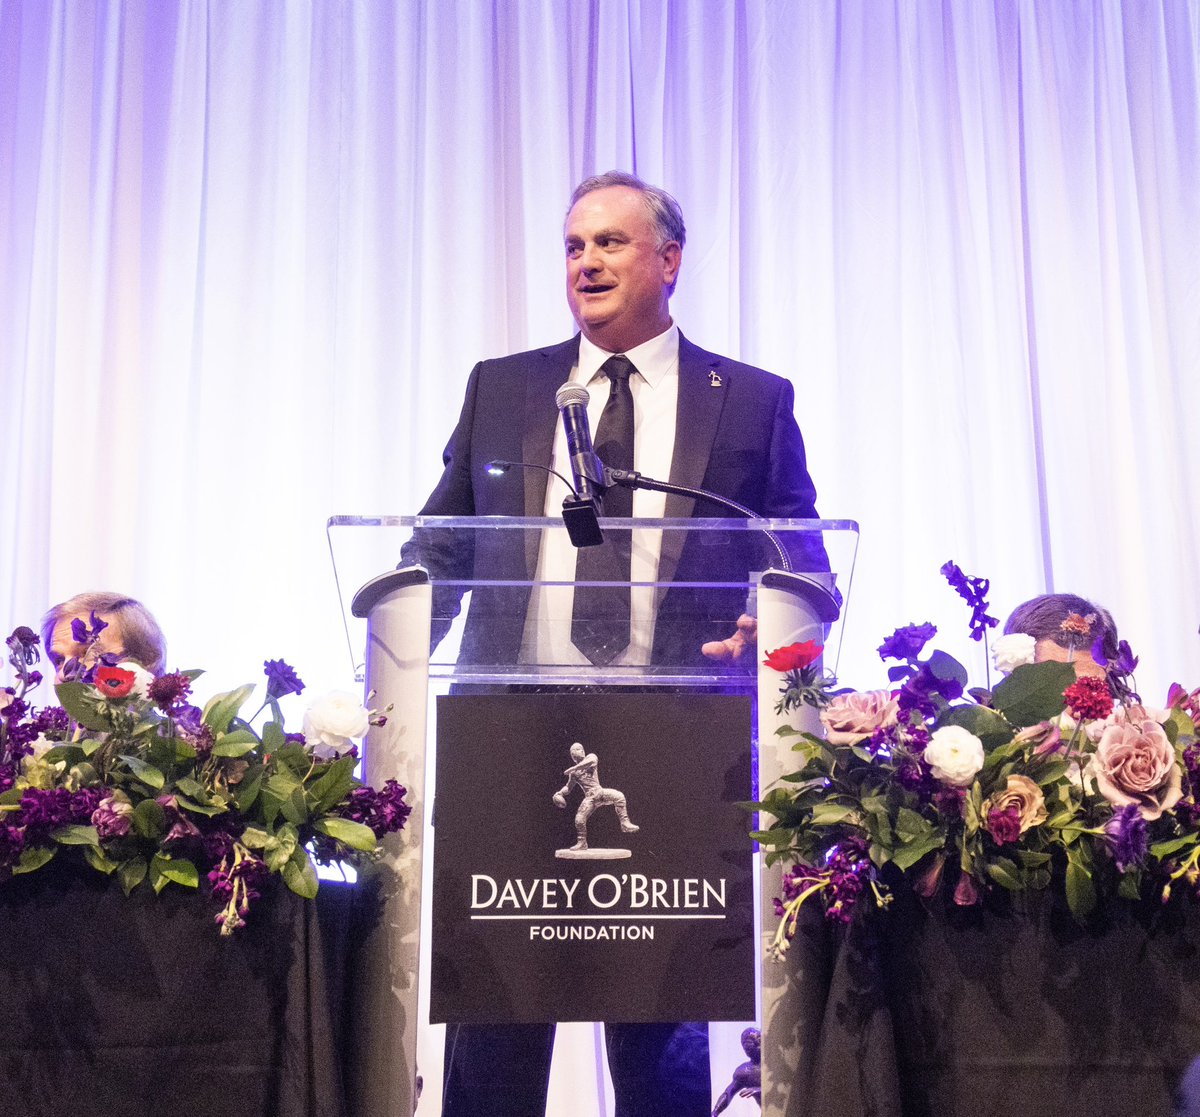 In honor of #SolarEclipse2024 we look back at a couple of our favorite Davey O’Brien Award dinner guests—2014 Legends Award recipient Warren 𝙈𝙤𝙤𝙣 and TCU head coach 𝙎𝙤𝙣𝙣𝙮 Dykes, who coached 2022 National Quarterback Award winner Max Duggan. 😎🌕🌞🌑